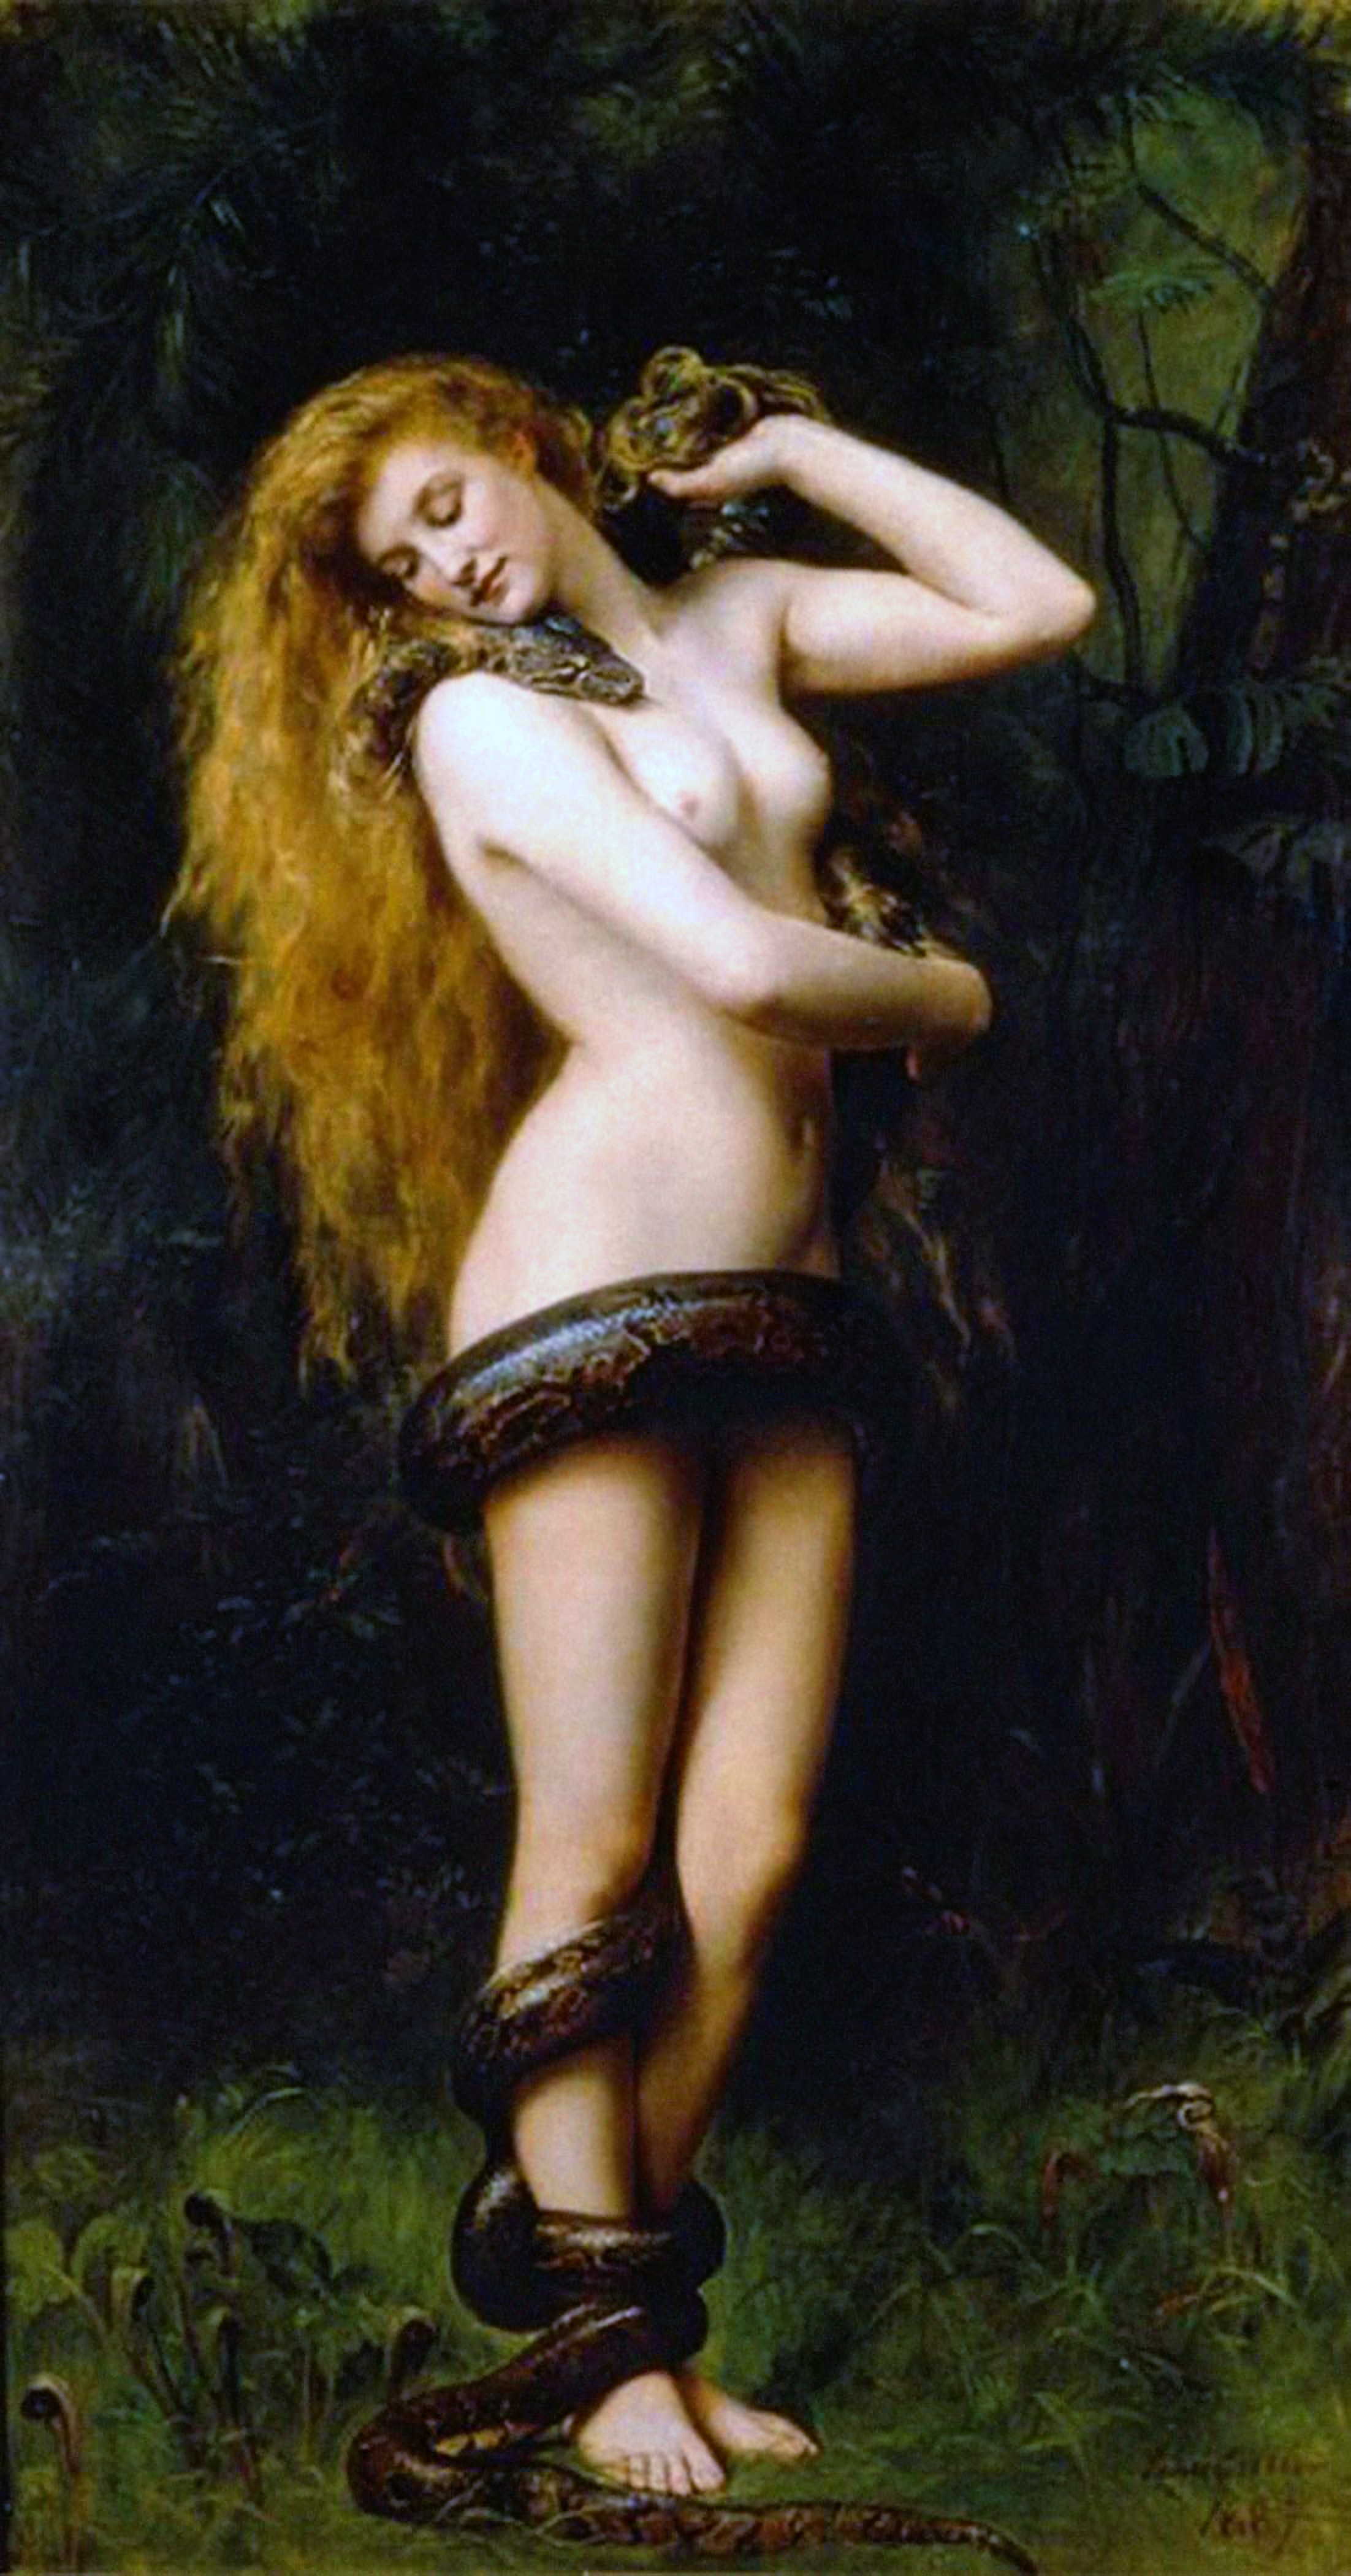 Lilith_John_Collier_painting_femme_fatal